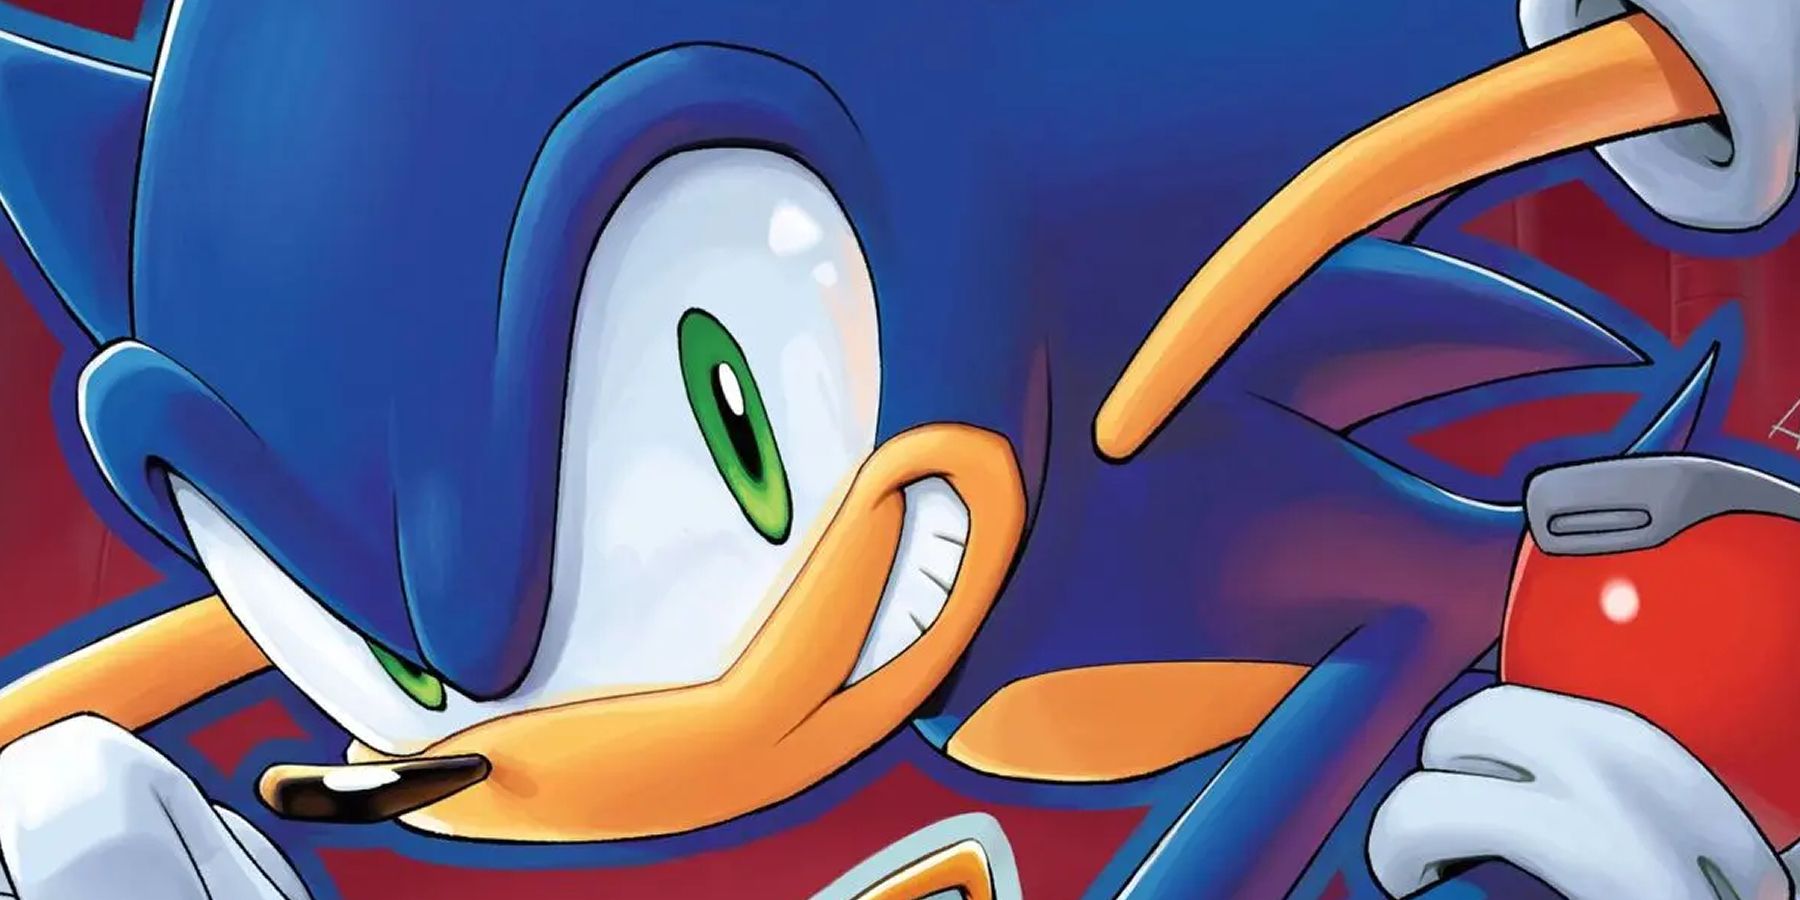 sonic-the-hedgehog-idw-issue-51-cover-close-up